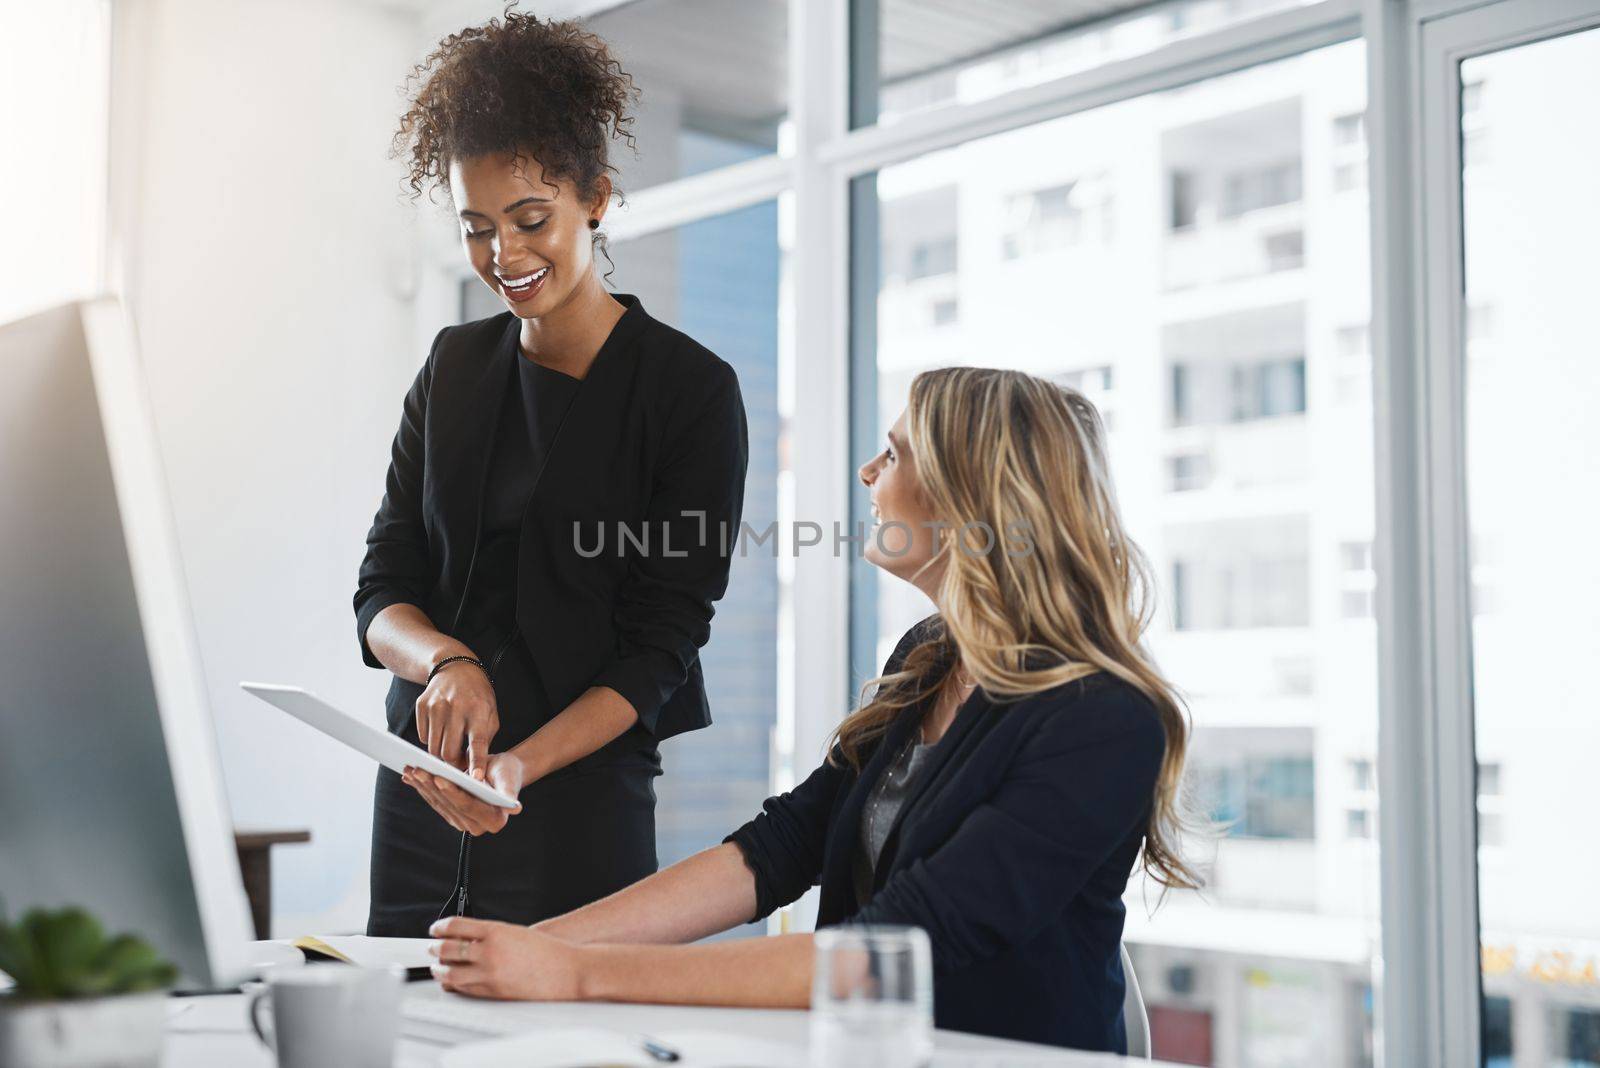 Technology can only improve their plans. two businesswomen working together in an office